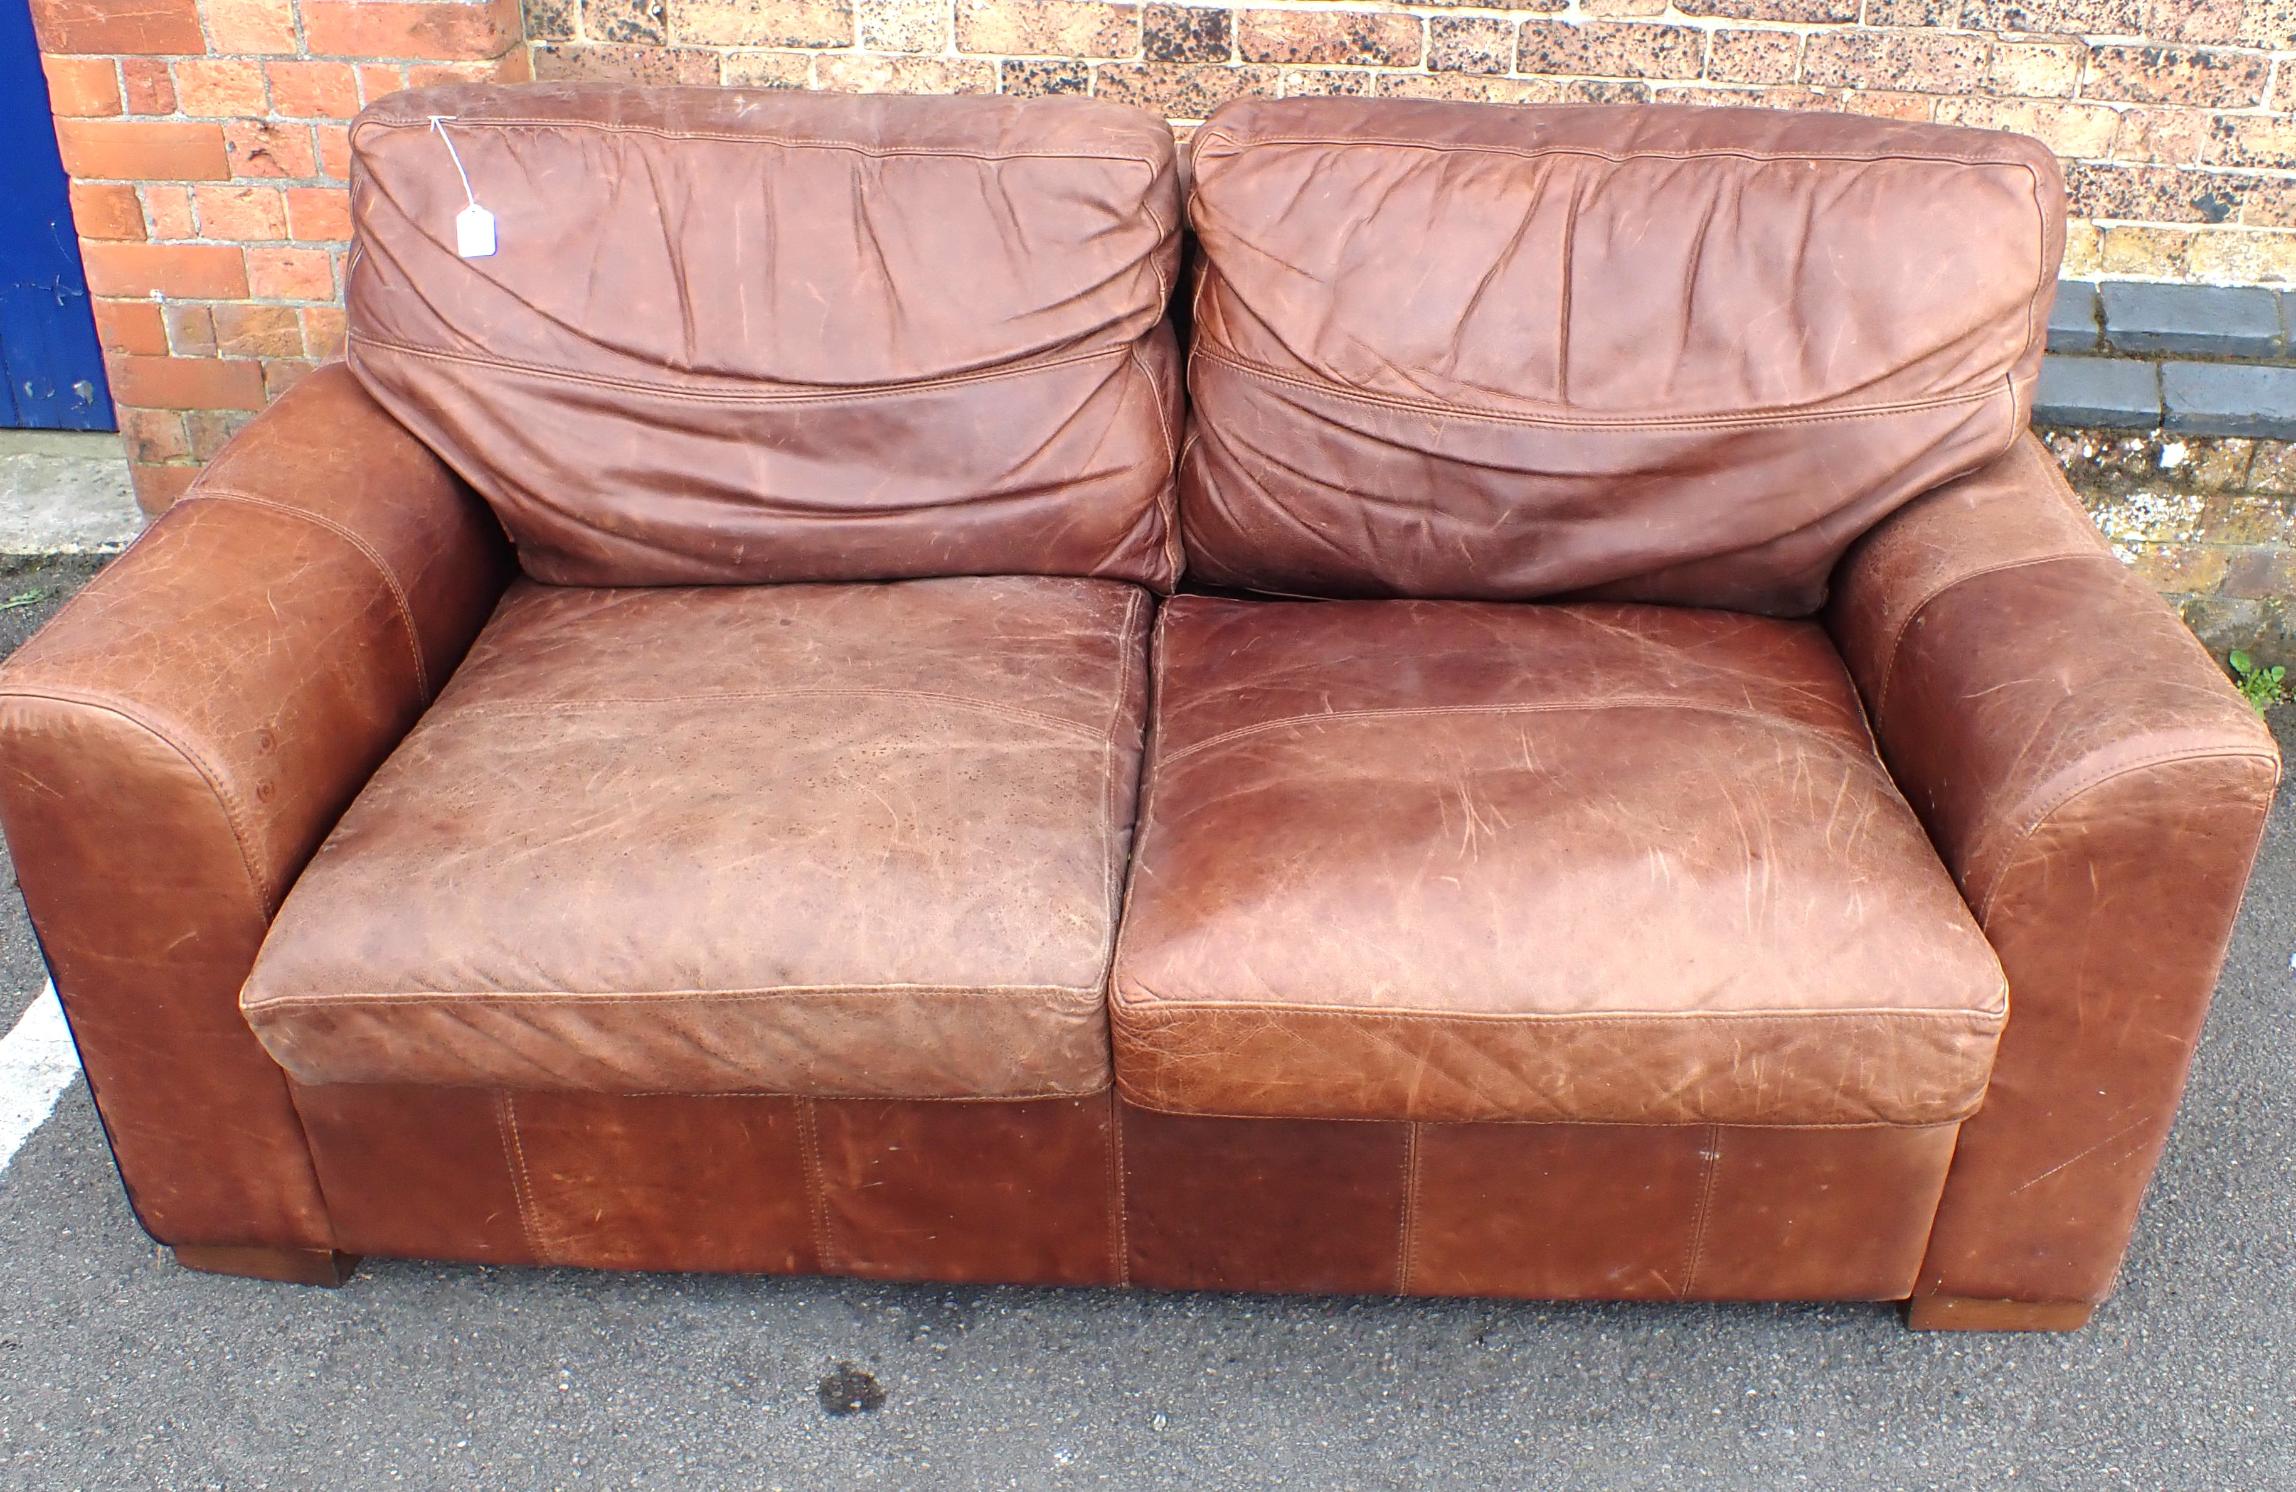 A MODERN LEATHER TWO-SEAT SOFA - Image 3 of 3